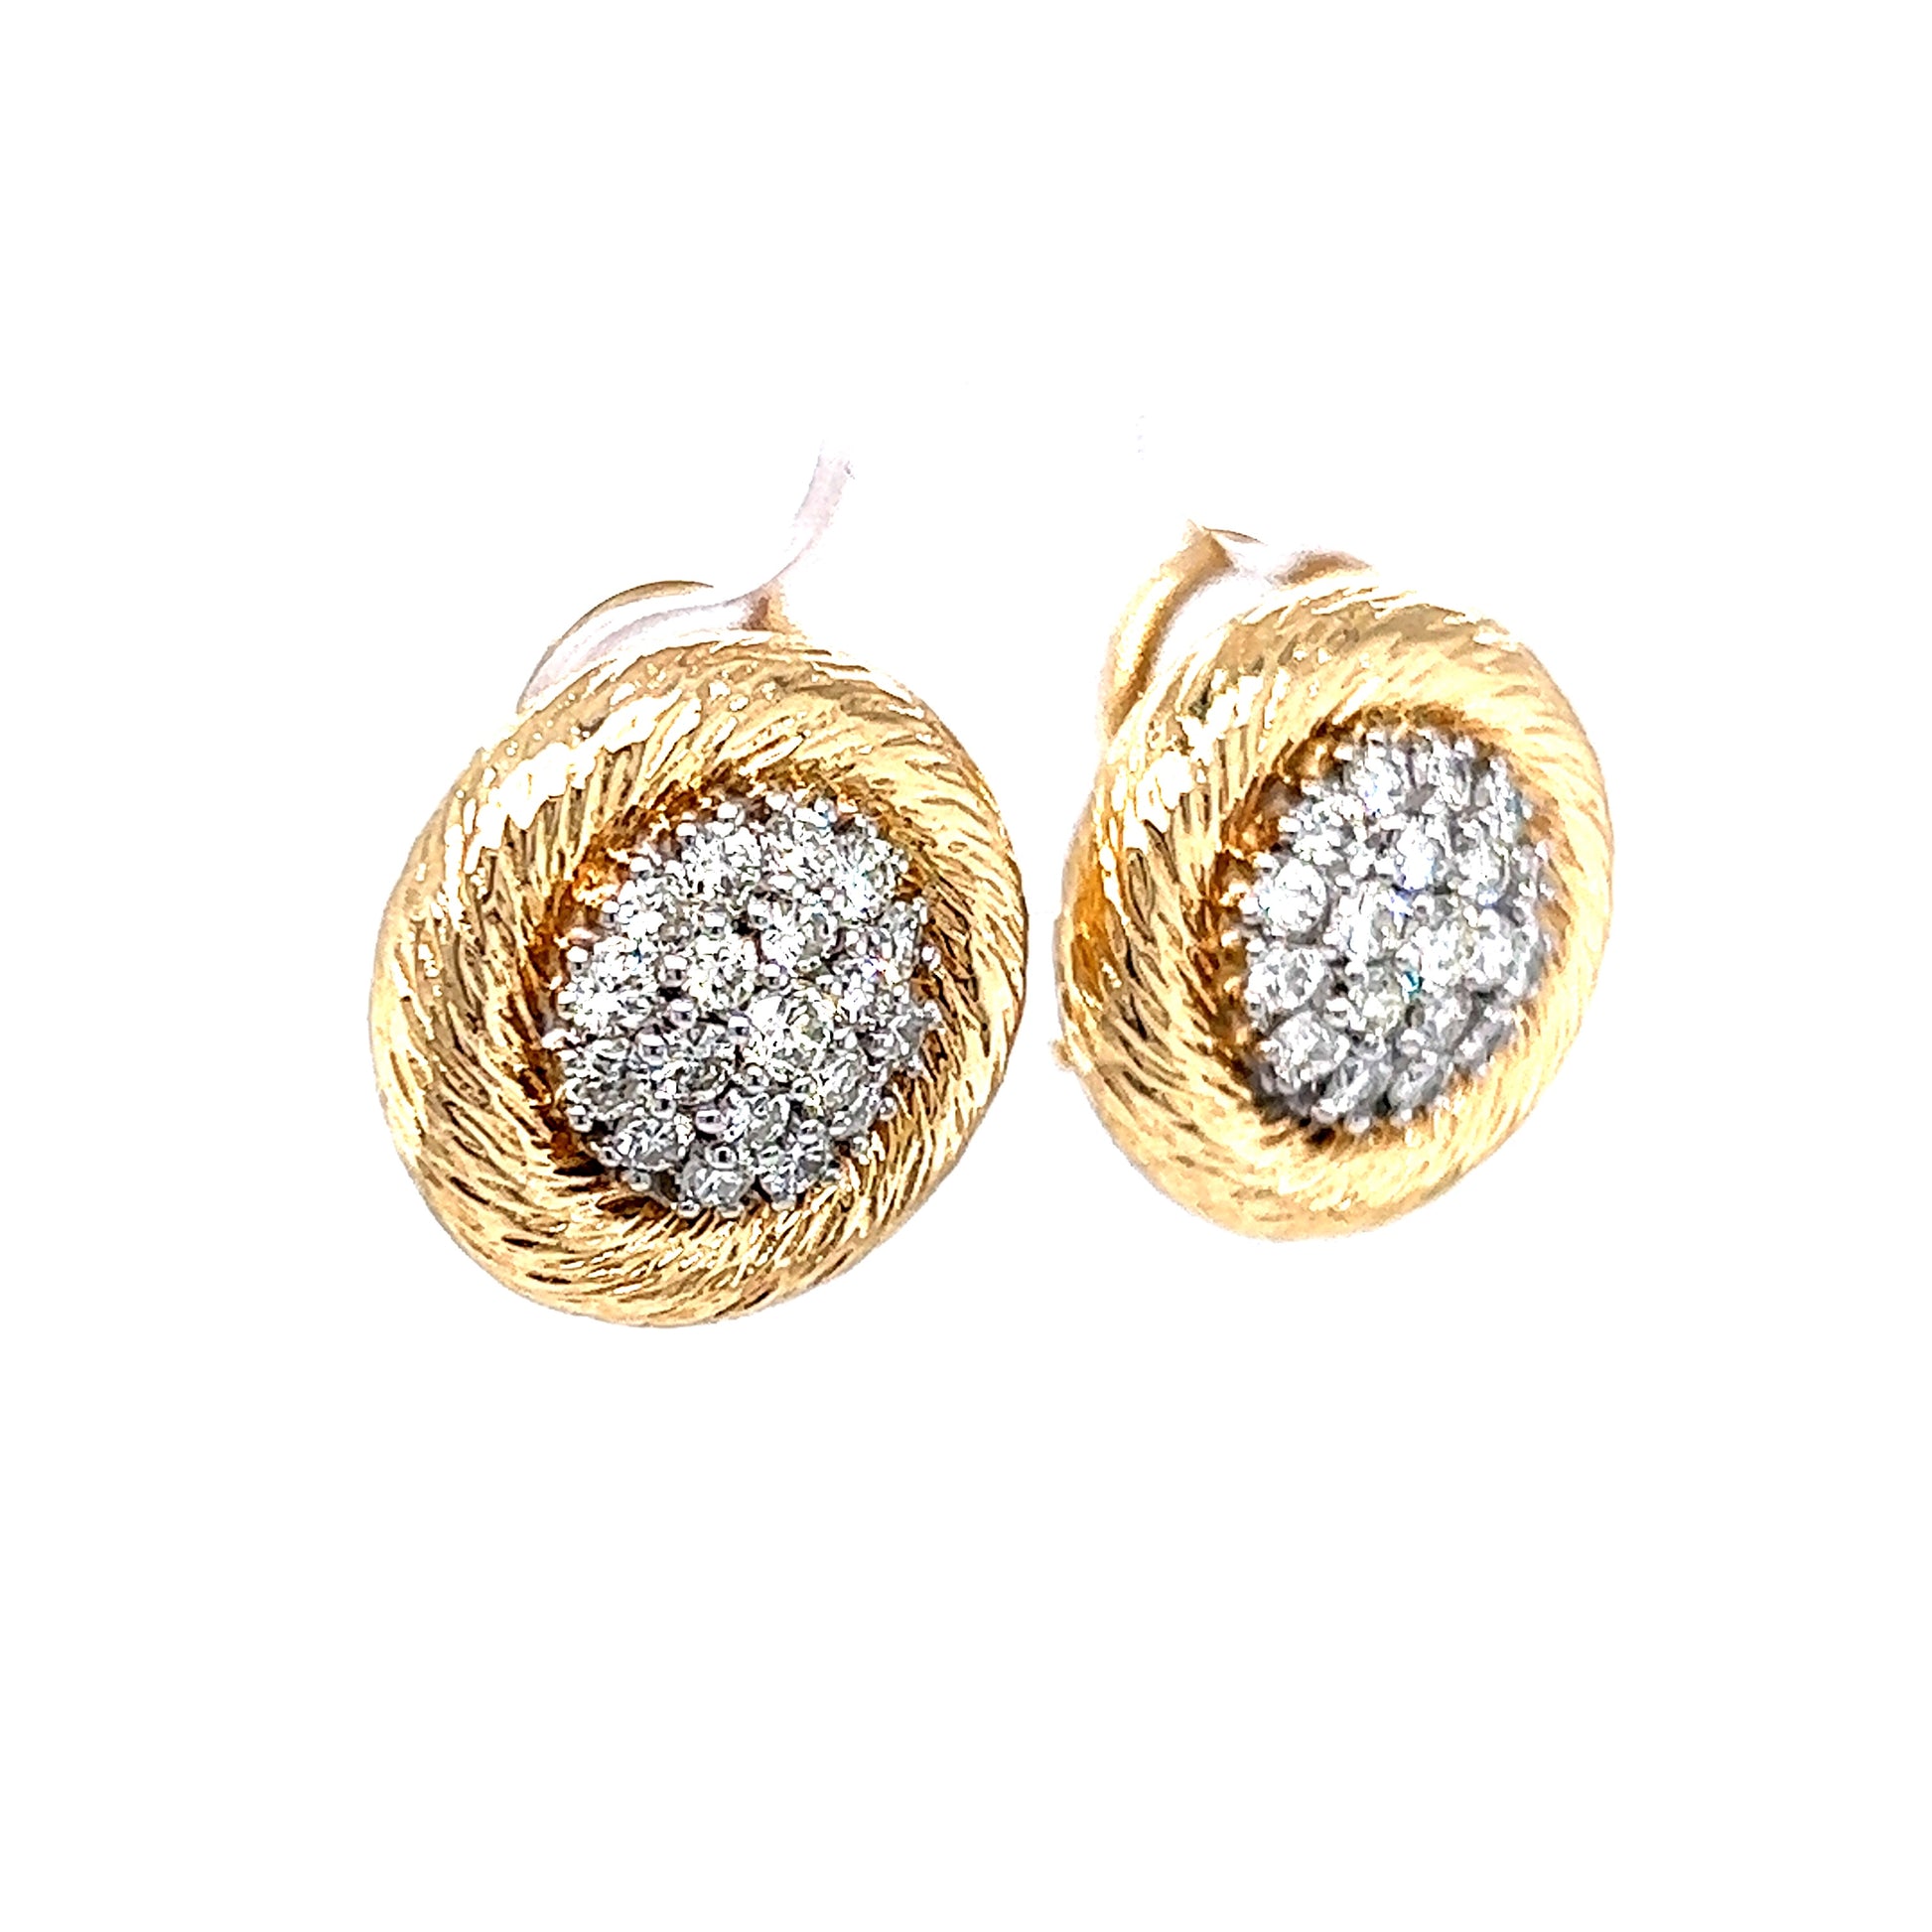 1.44 Pave Diamond Stud Earrings in 14k Yellow & White GoldComposition: 14 Karat Yellow Gold/14 Karat White GoldTotal Diamond Weight: 1.44 ctTotal Gram Weight: 7.5 gInscription: 14k